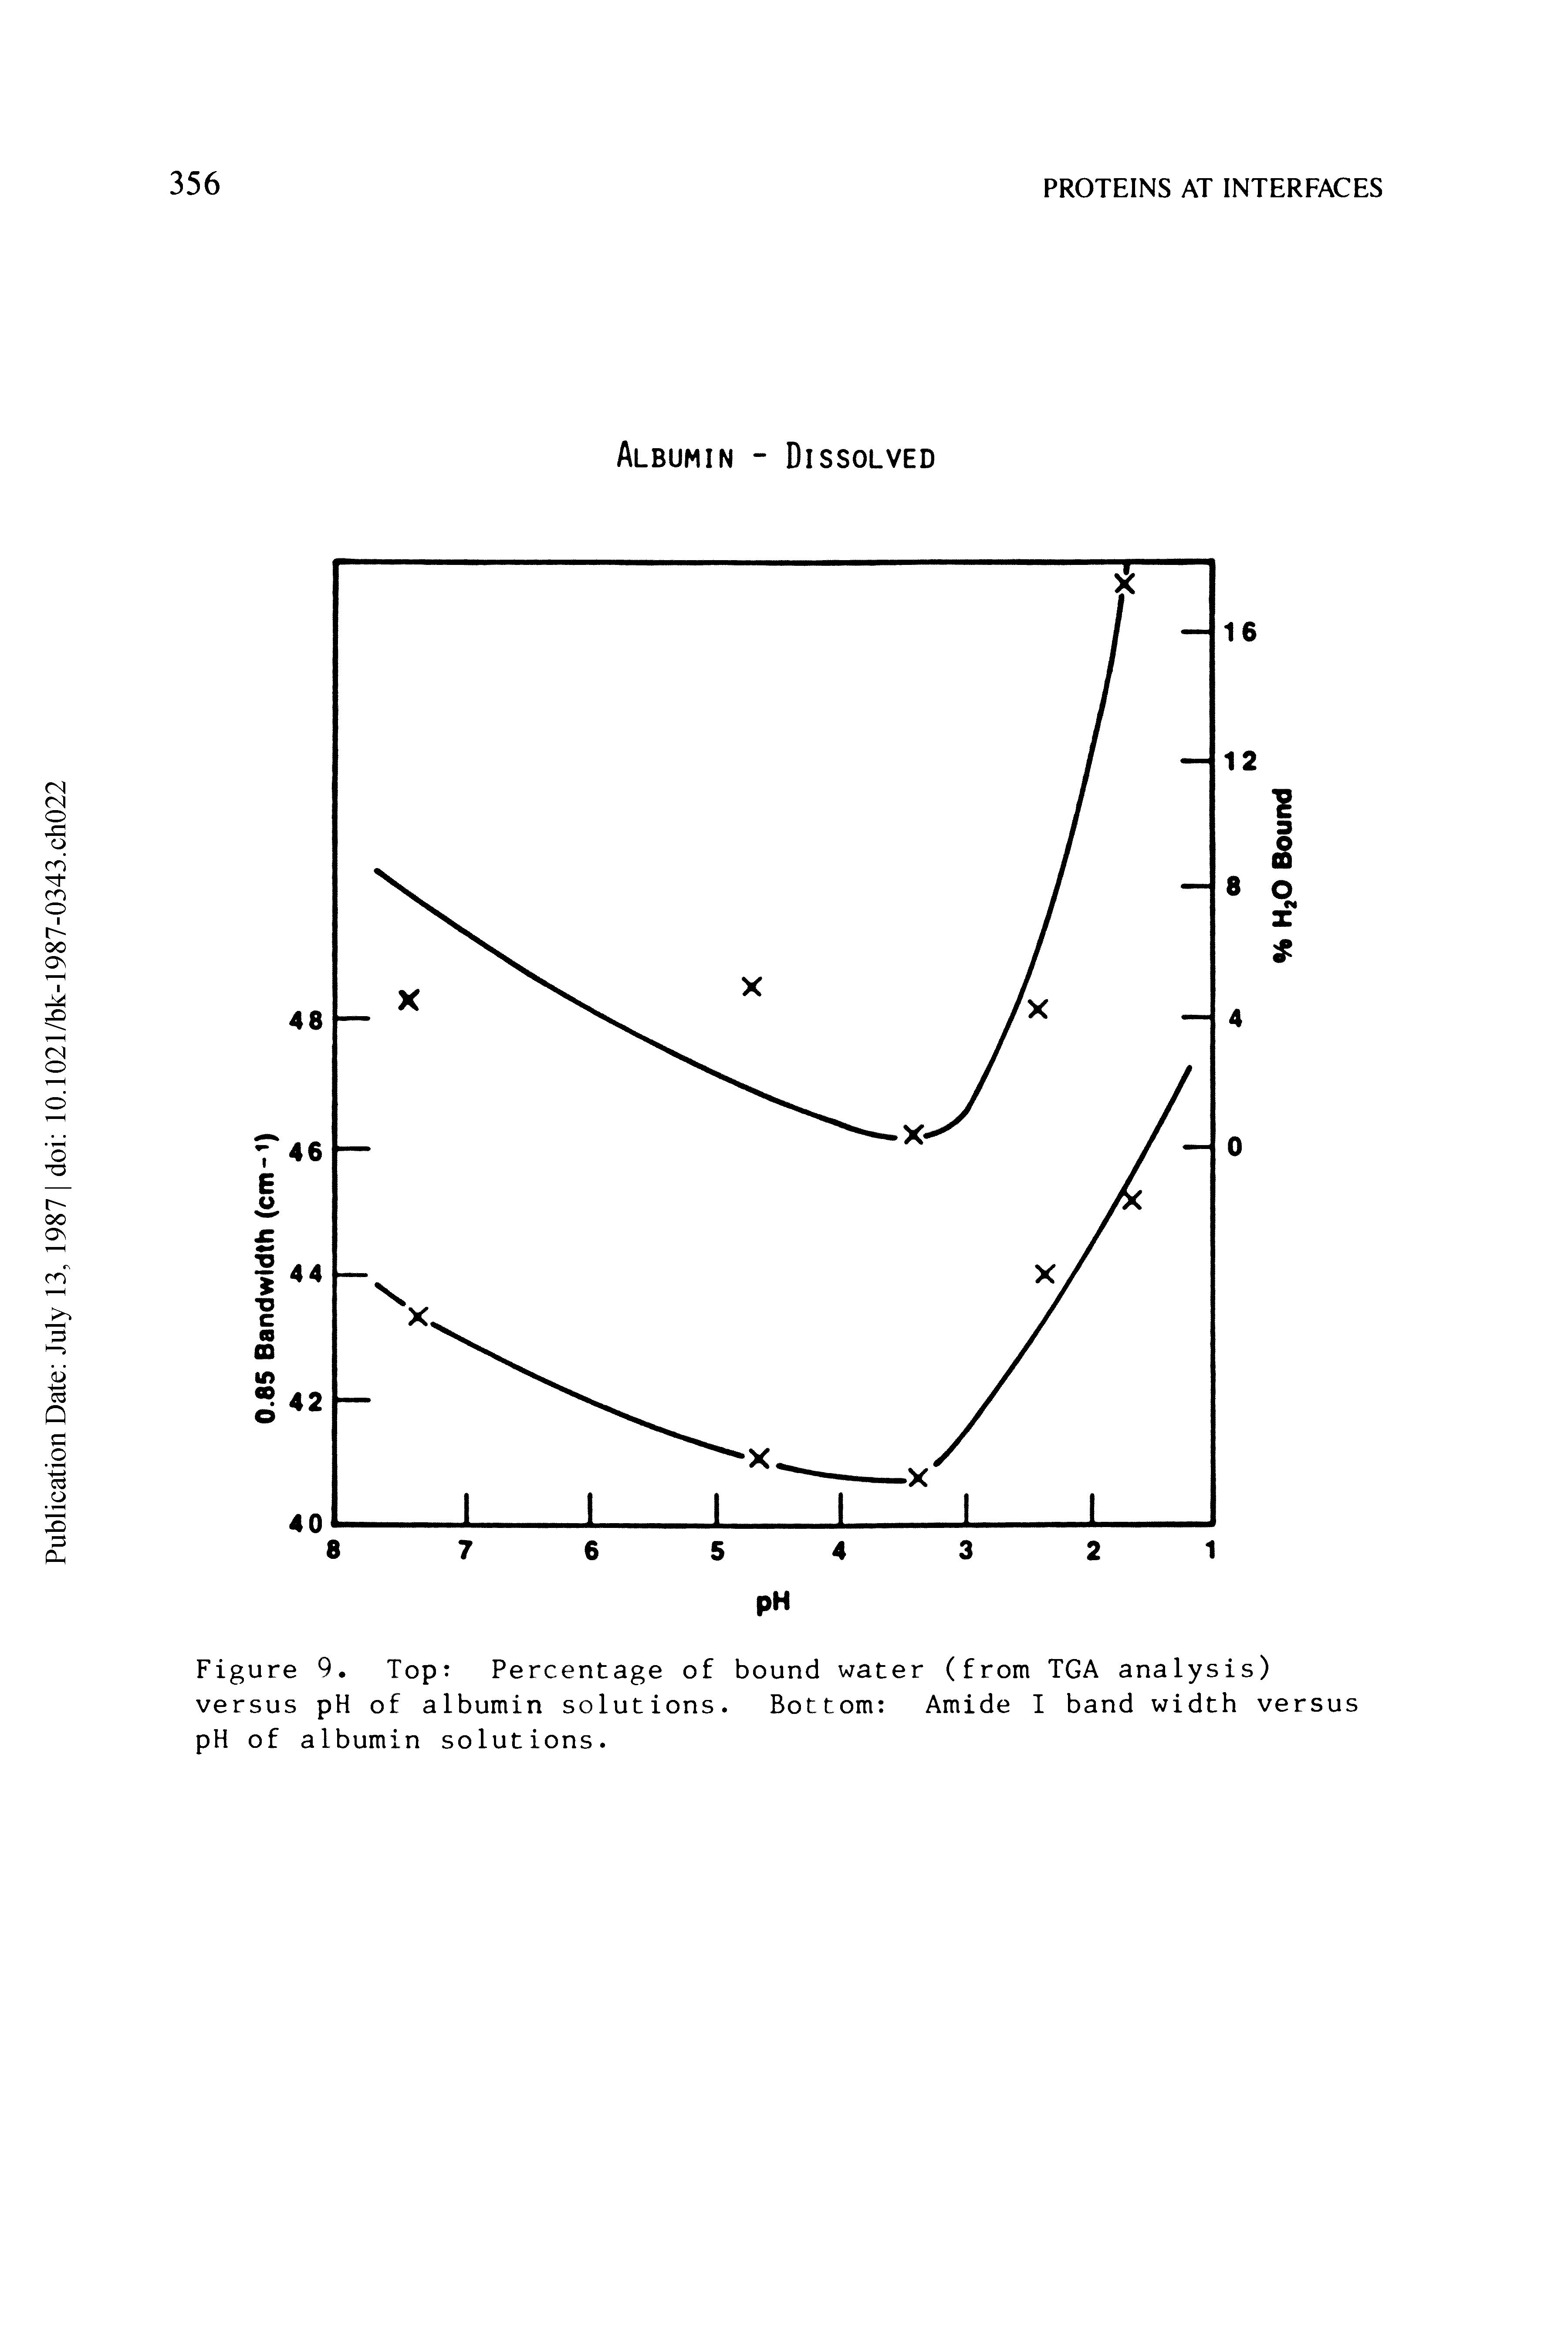 Figure 9. Top Percentage of bound water (from TGA analysis) versus pH of albumin solutions. Bottom Amide I band width versus pH of albumin solutions.